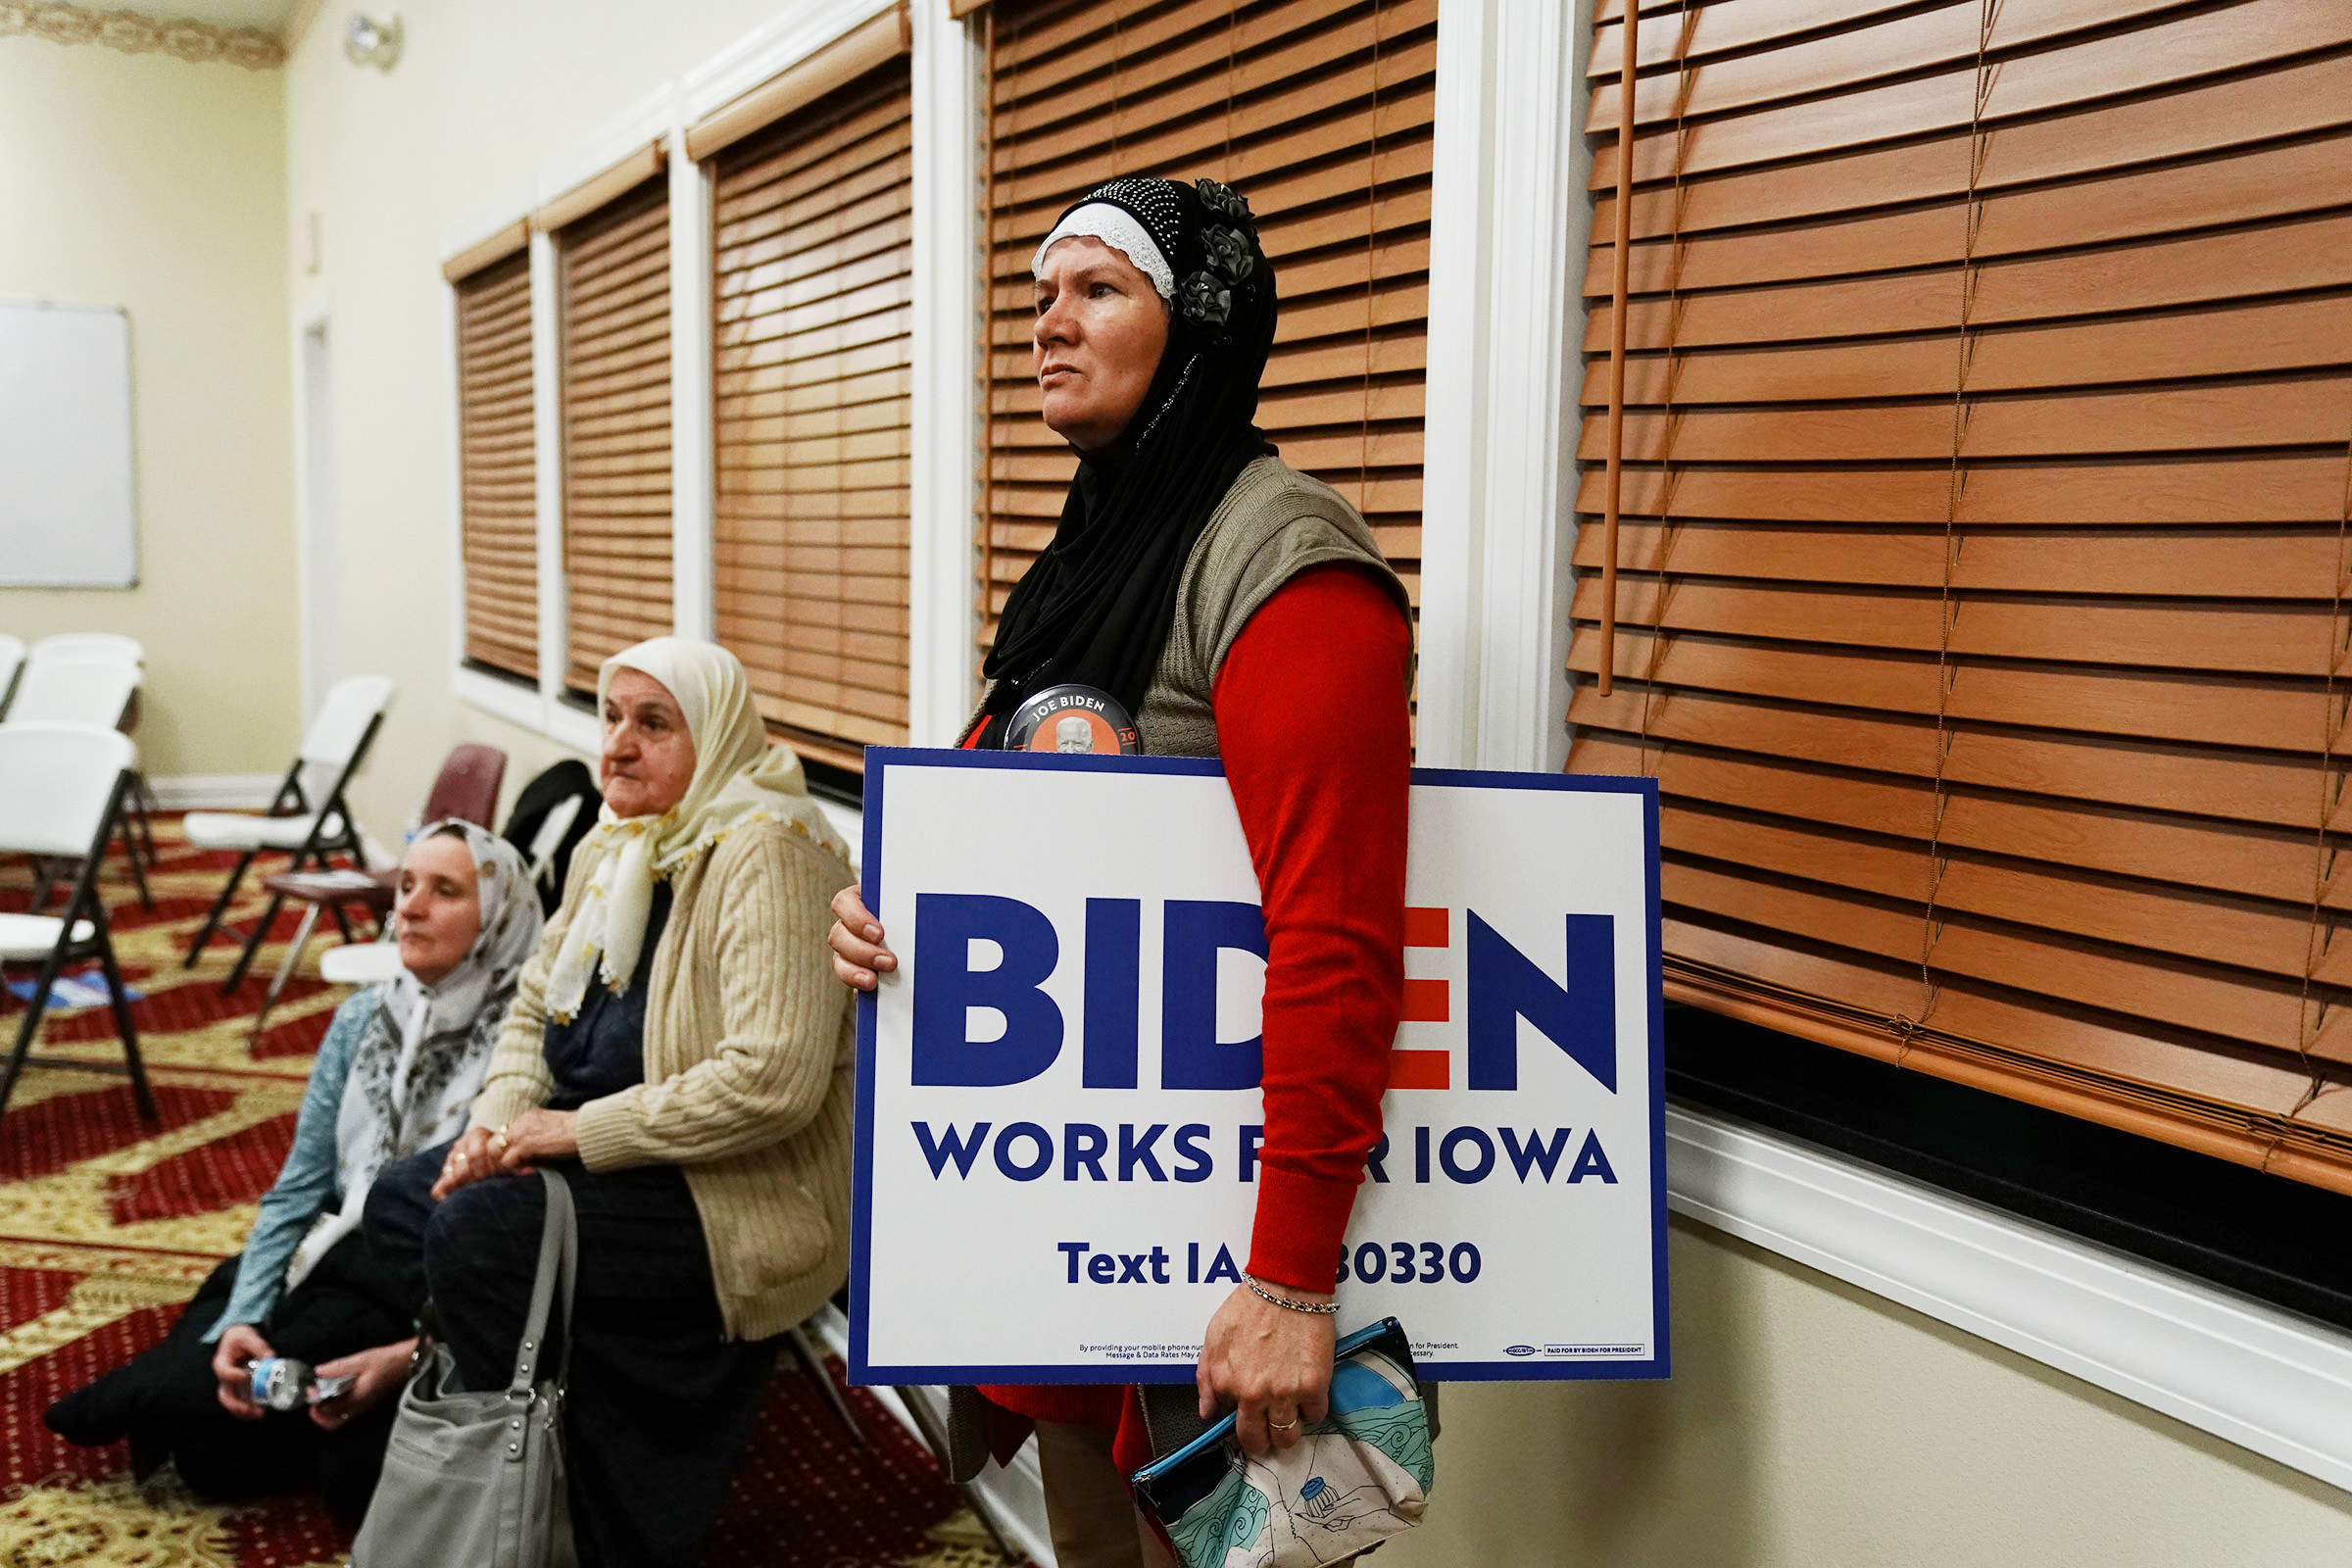 A participant holds a campaign sign for Biden during the first-in-the-nation Iowa caucus in Des Moines. (Elijah Nouvelage—Bloomberg/Getty Images)